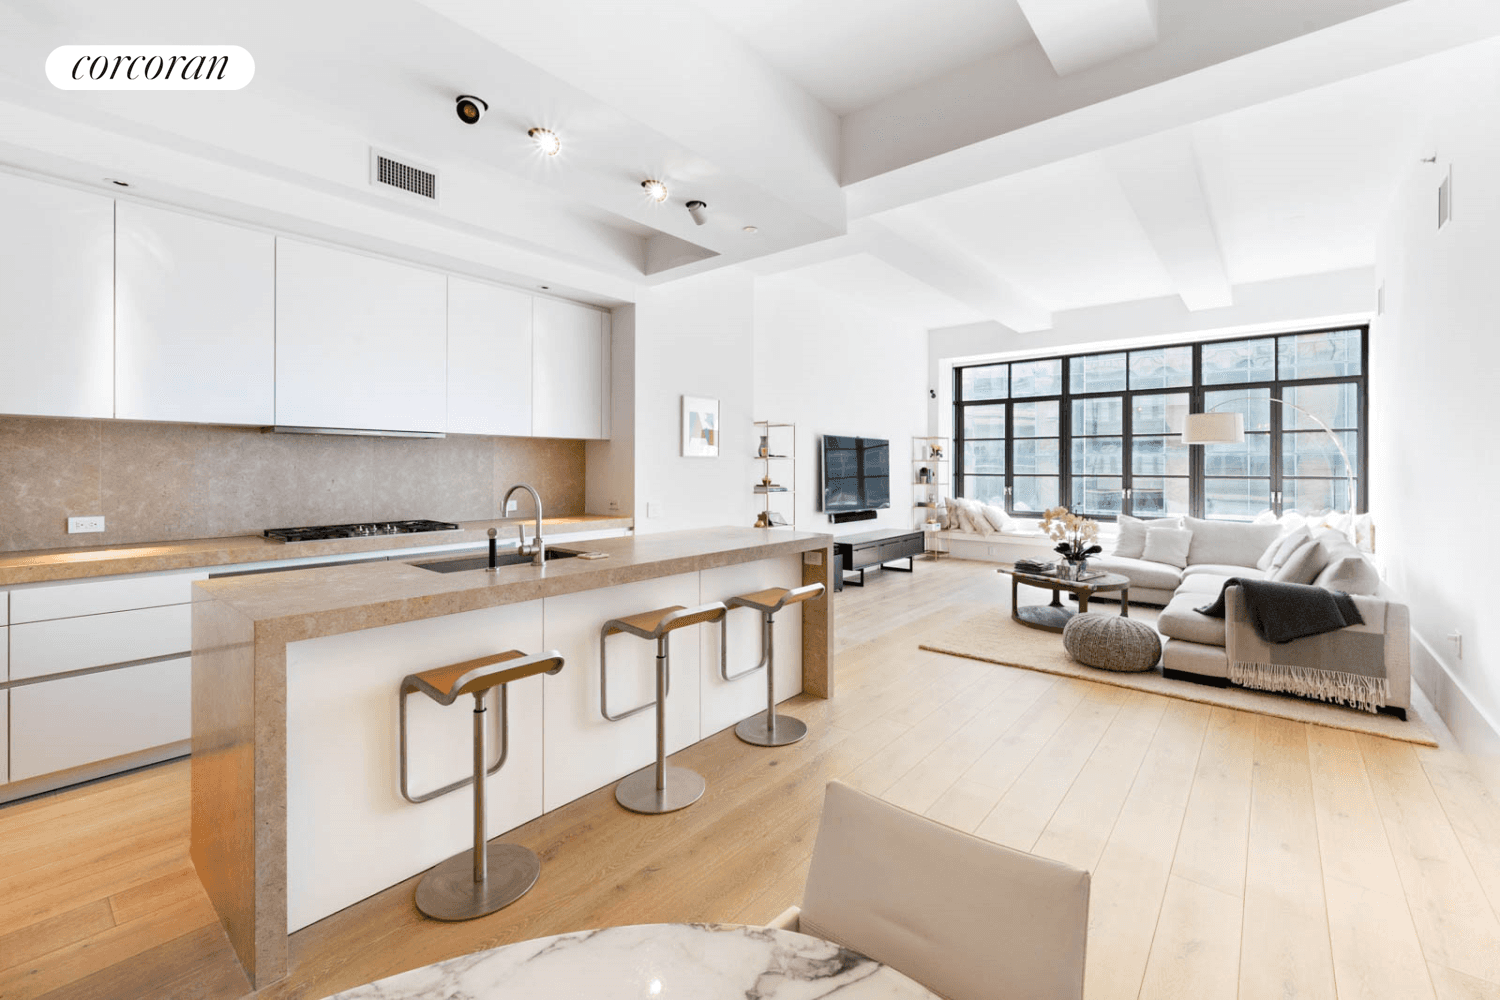 This 3 bedroom, 2. 5 bath loft residence offers dramatic 11 5 ceilings, and South, North, and West exposures.